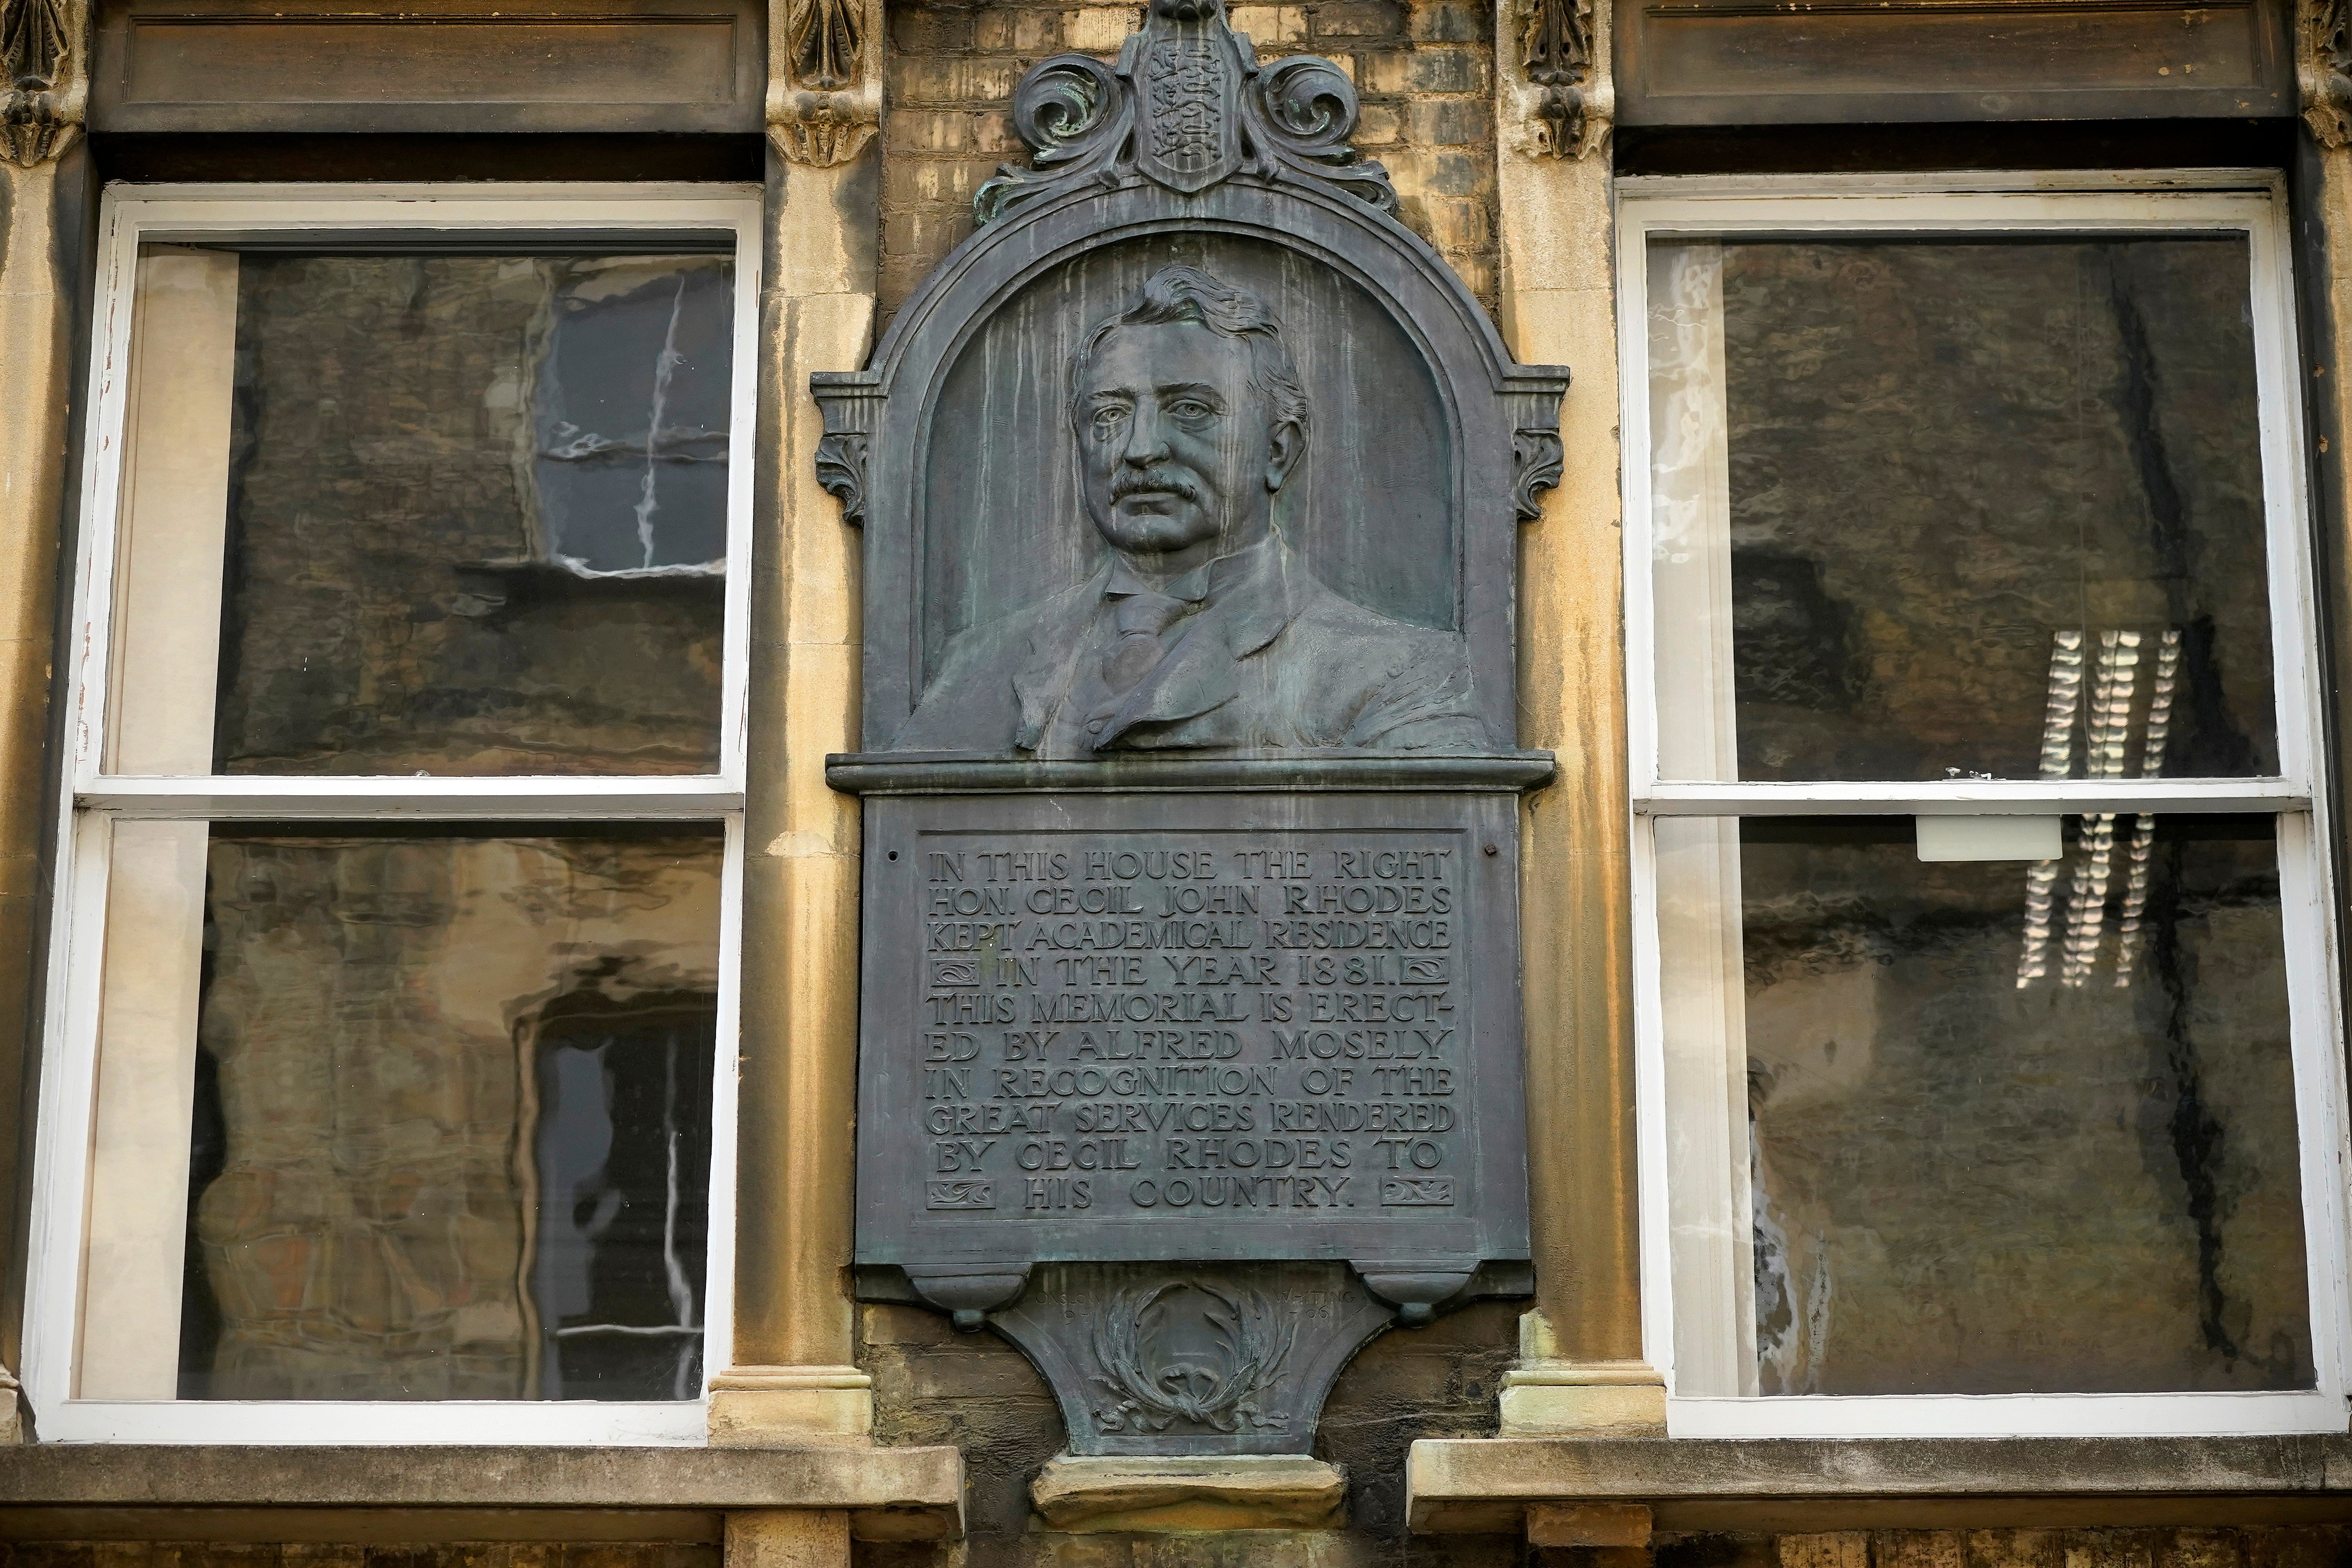 Rhodes was a student at Oriel and left the college £100,000 when he died in 1902